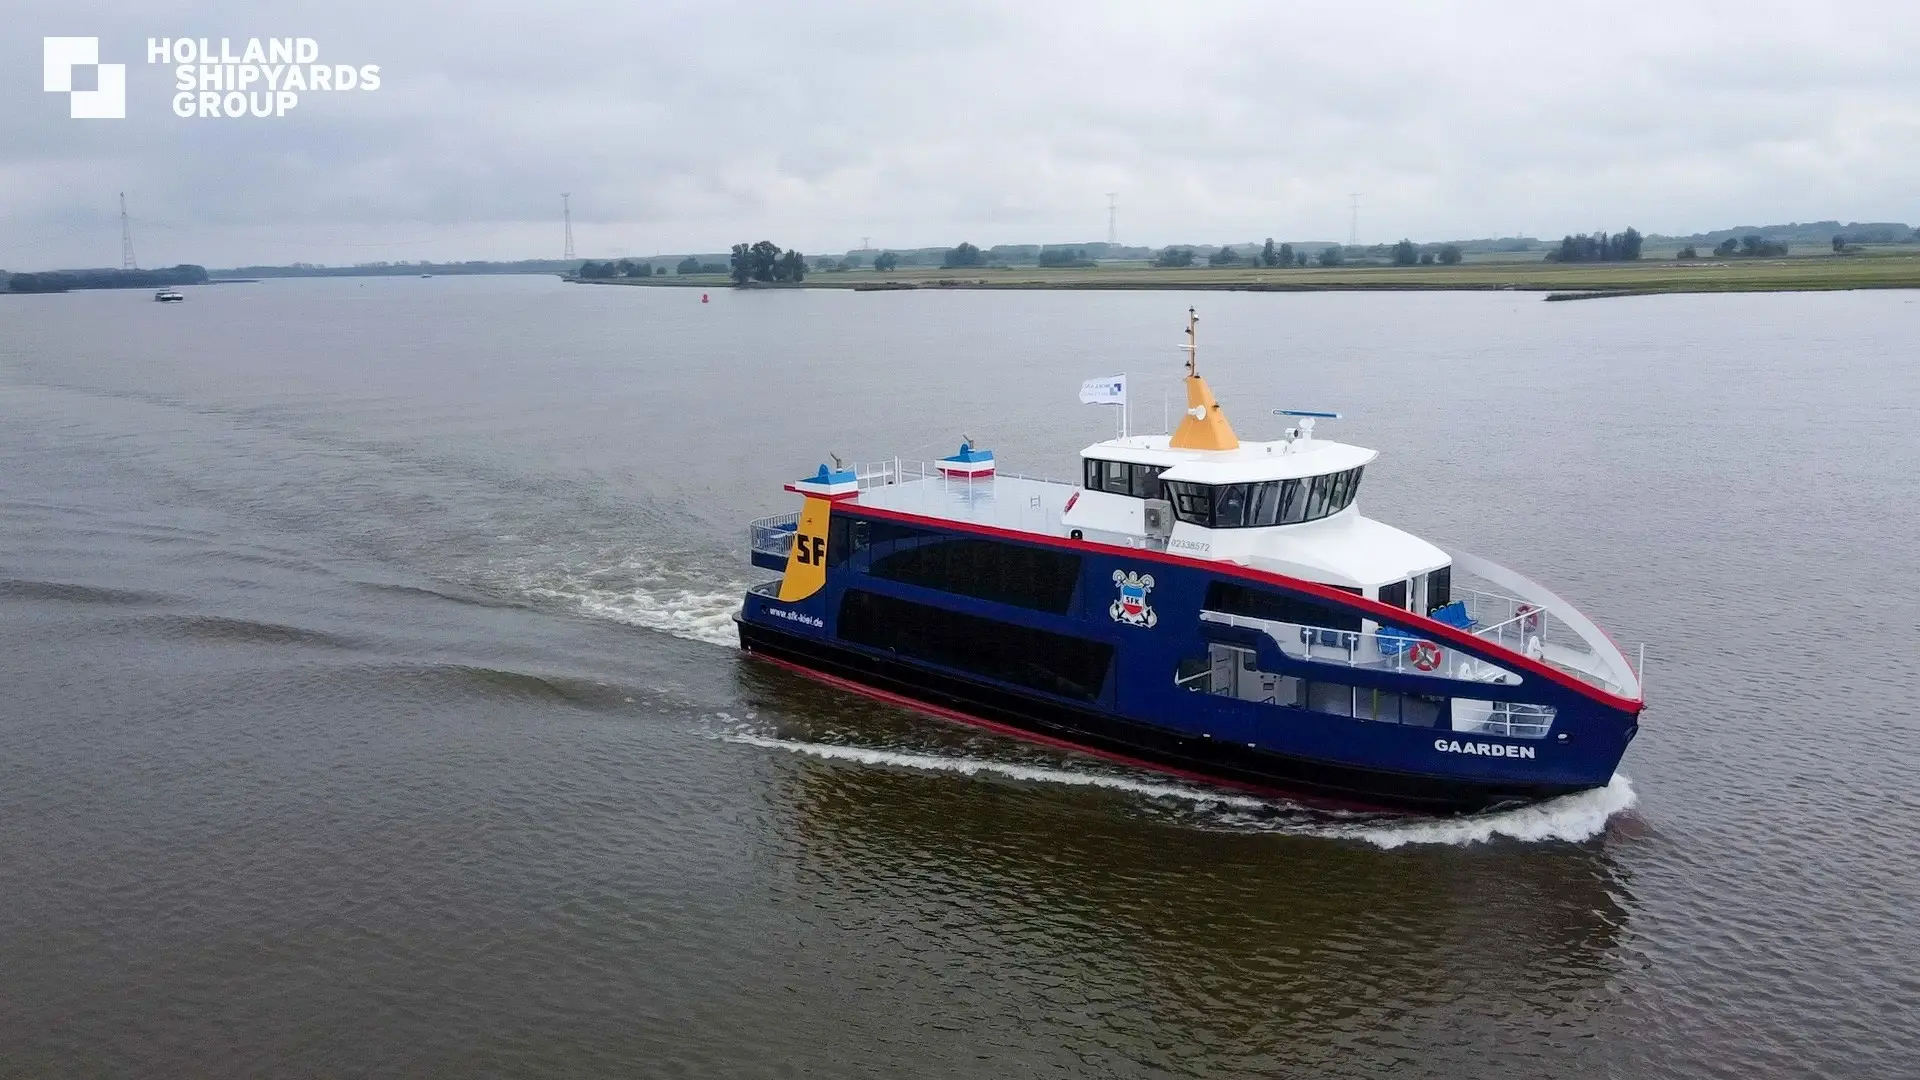 Holland Shipyards Group delivers 1st new hybrid ferry to Germany’s SFK